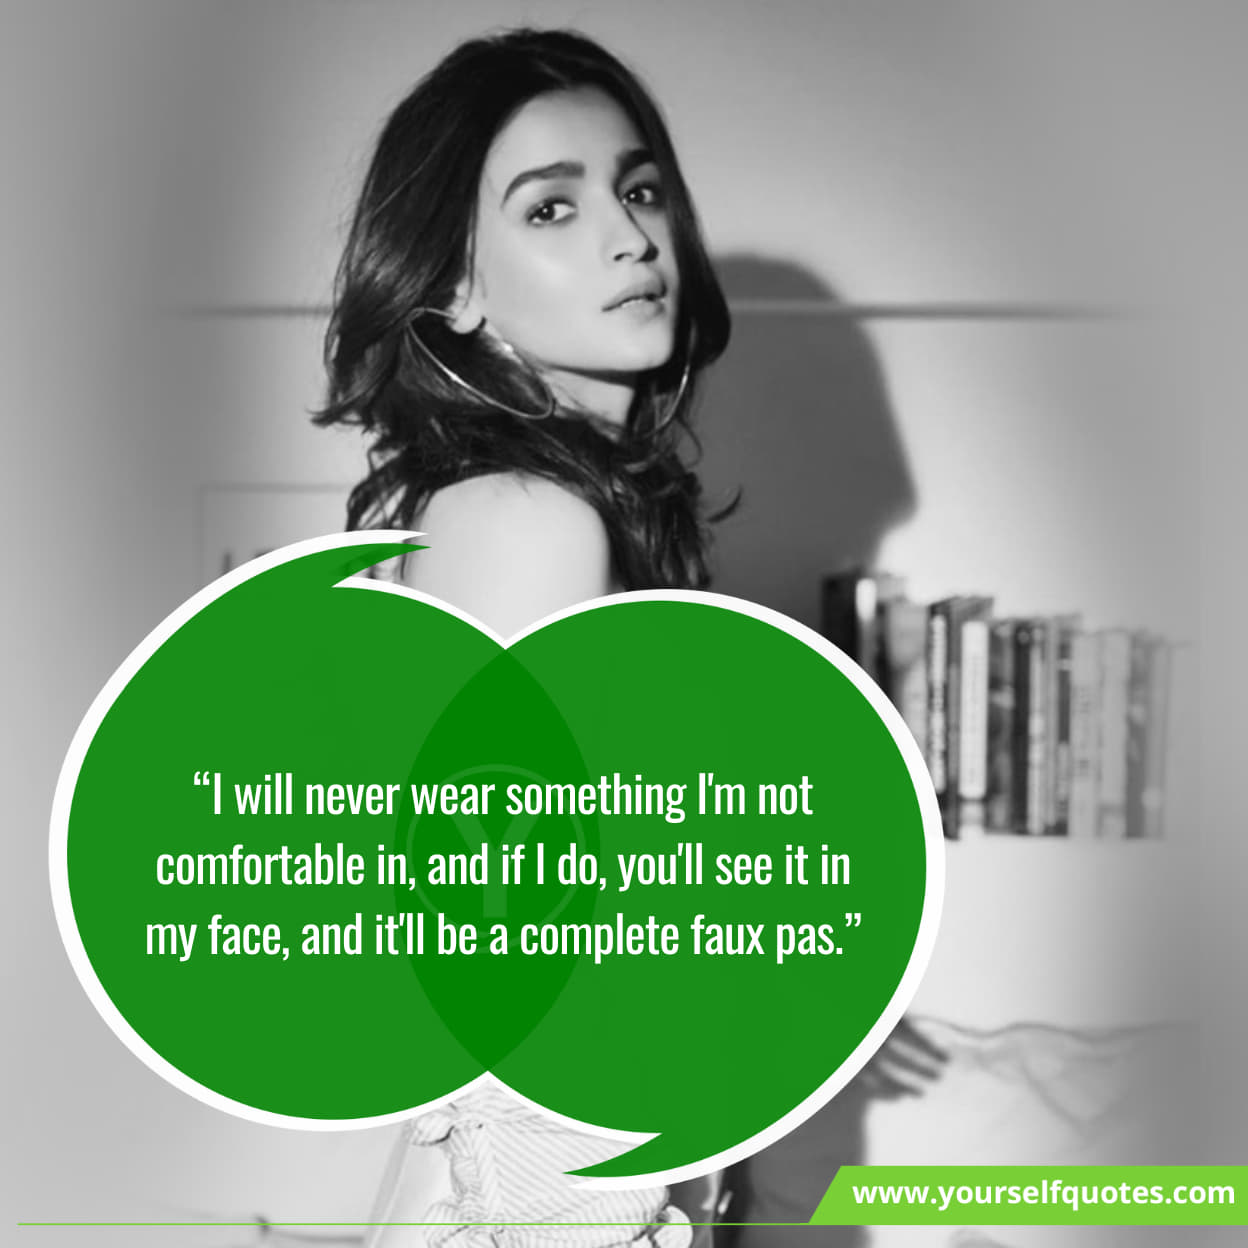 Best Quotes By Alia Bhatt For Success